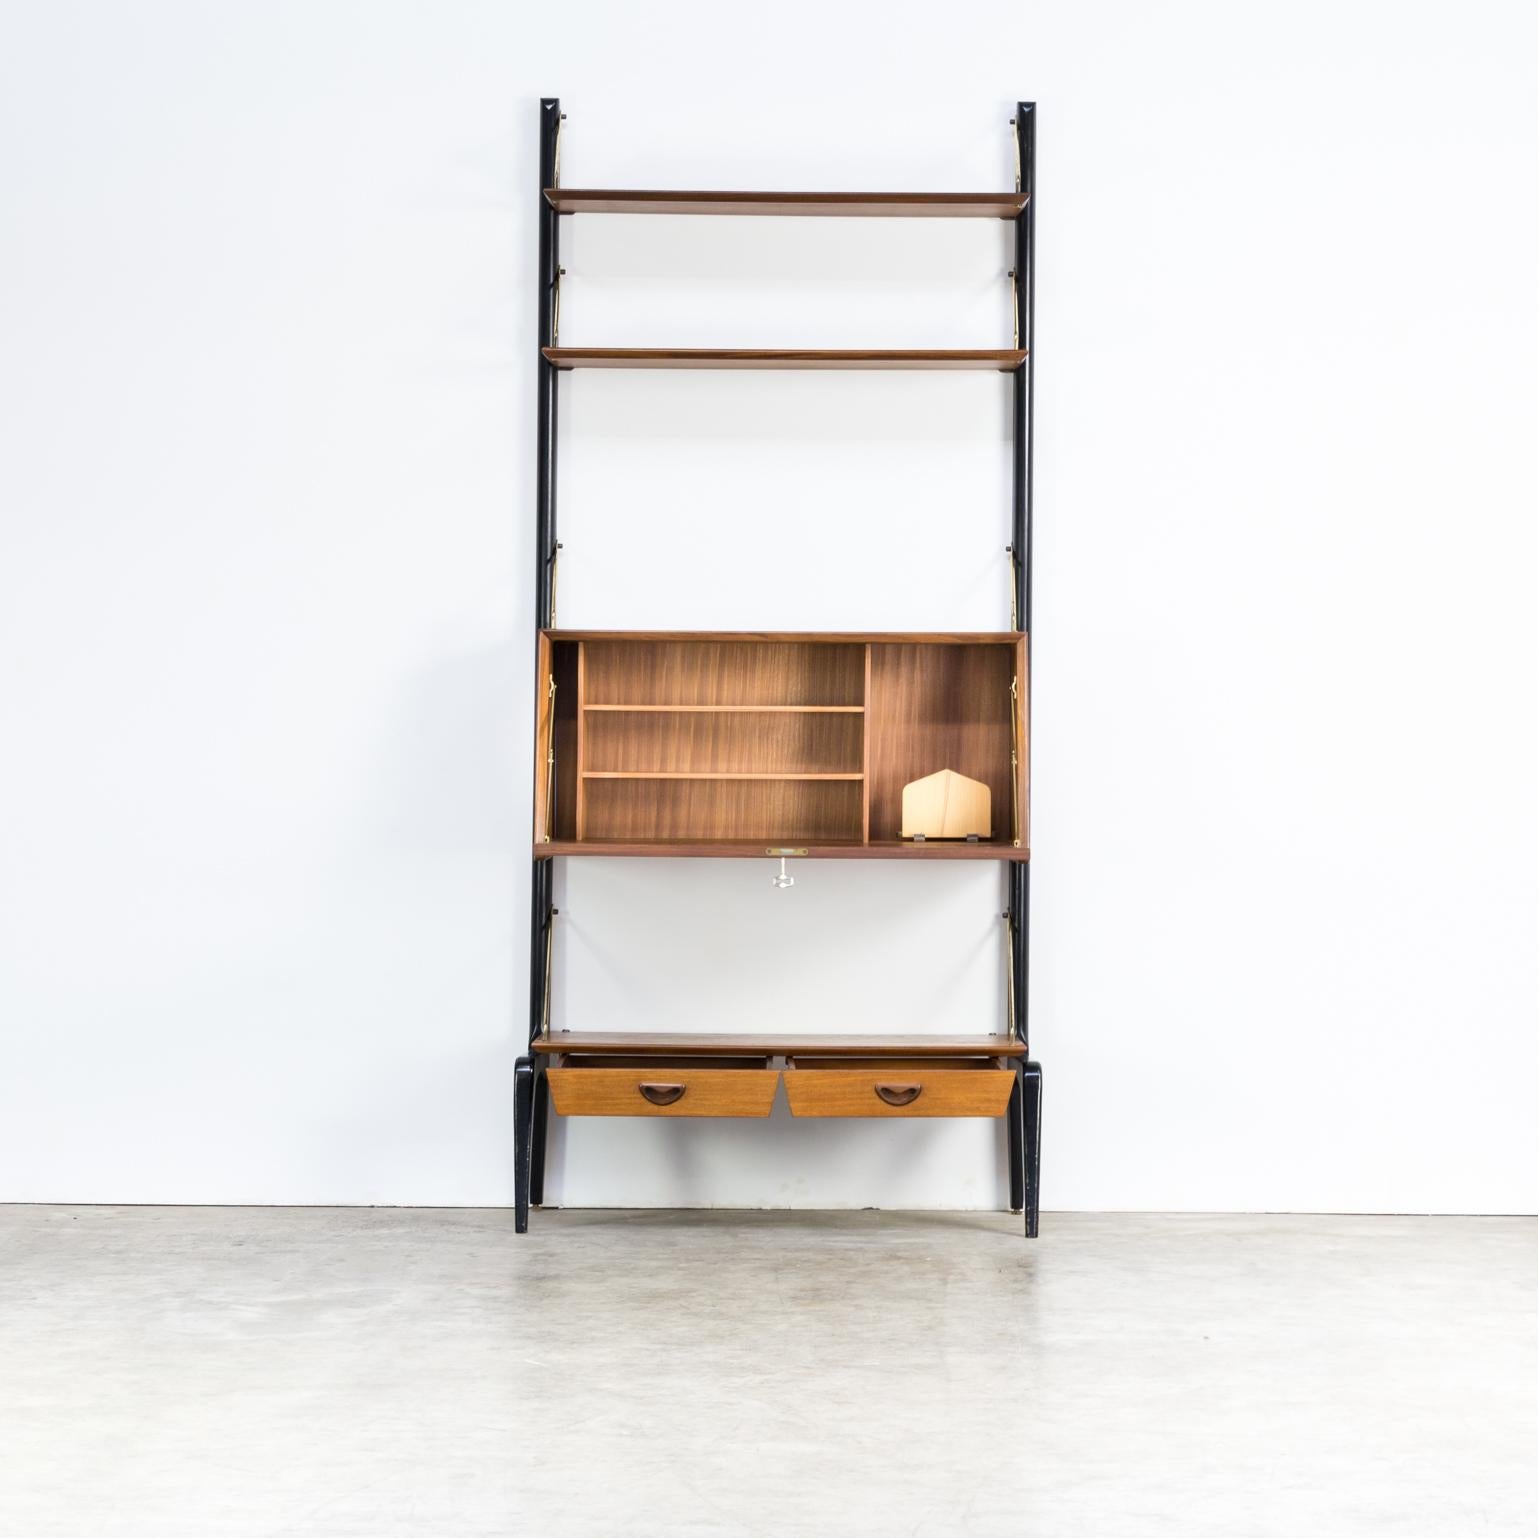 1960s Louis Van Teeffelen wall unit for WéBé. Good condition consistent with age and use.